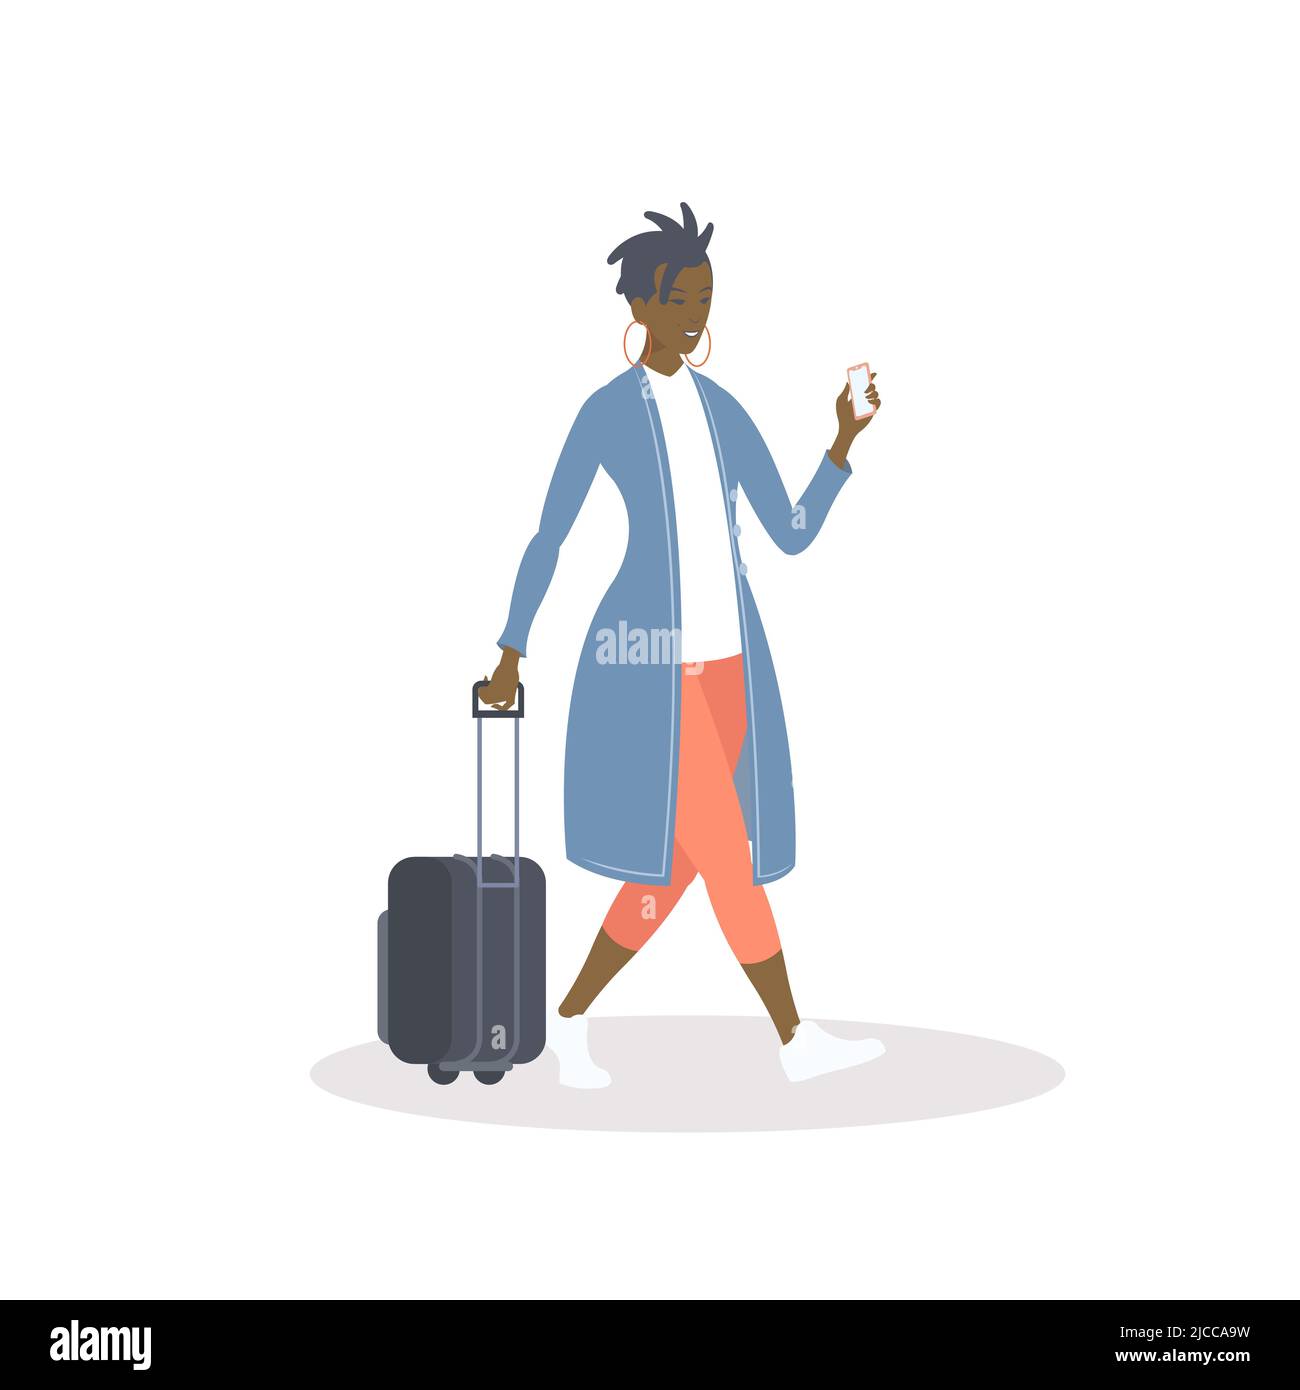 airport background clipart black